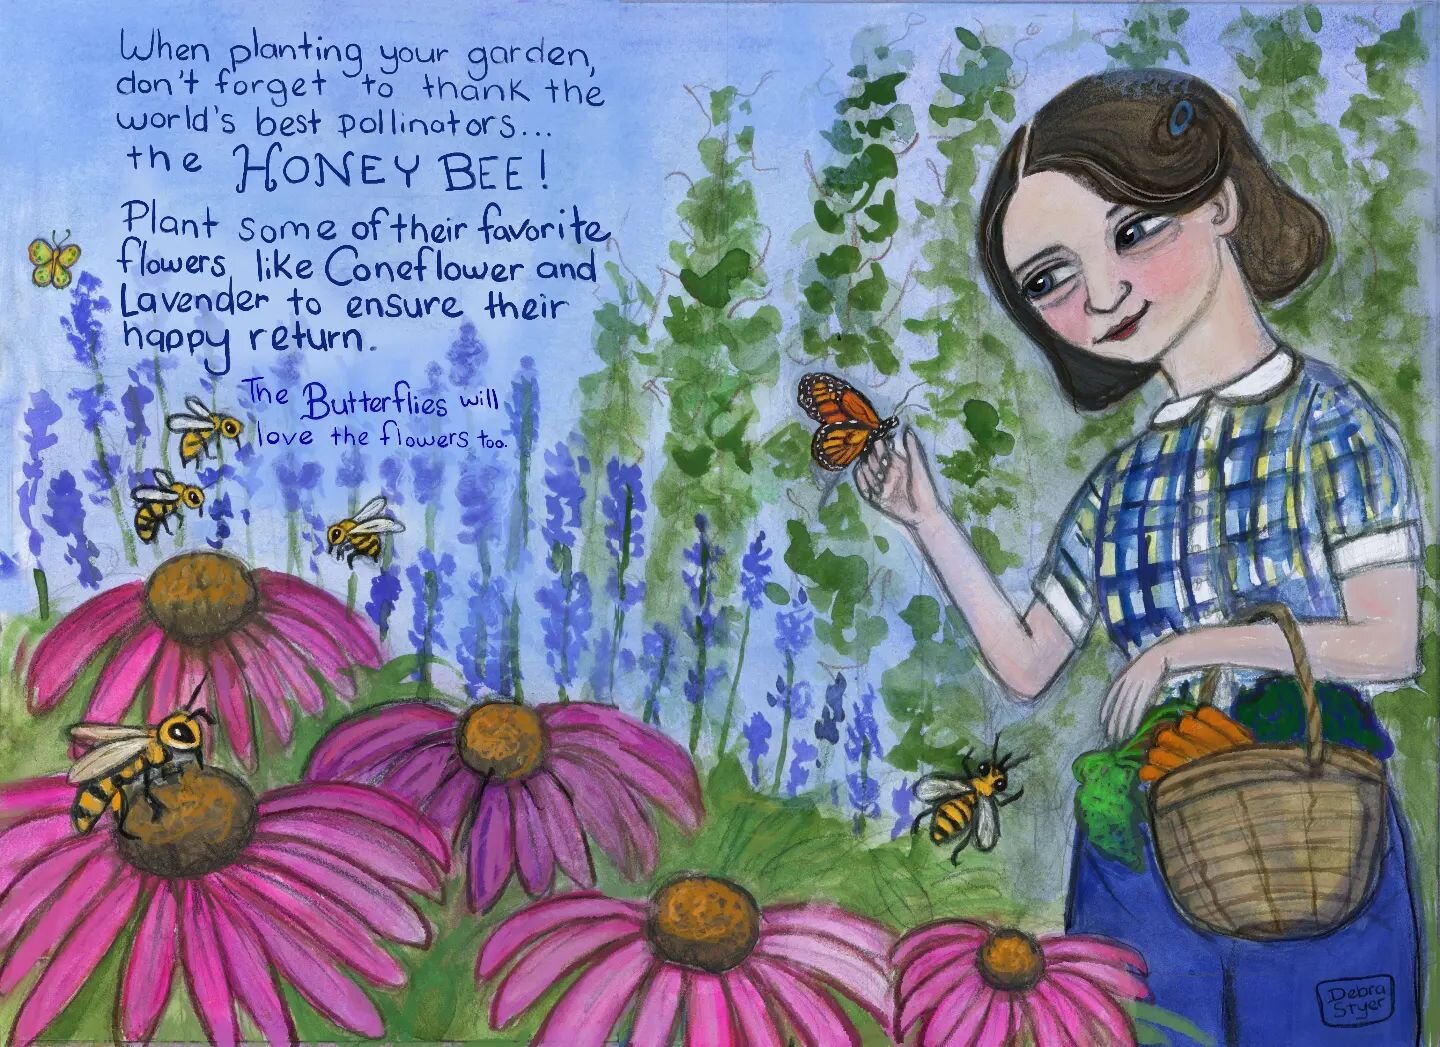 Here's my final illustration assignment for my @makeartthatsells Portfolio Bootcamp class. I painted a double page book spread of a vegetable garden with a little extra love for the honeybees.  Who doesn't love the bees? I mean, what would we do with